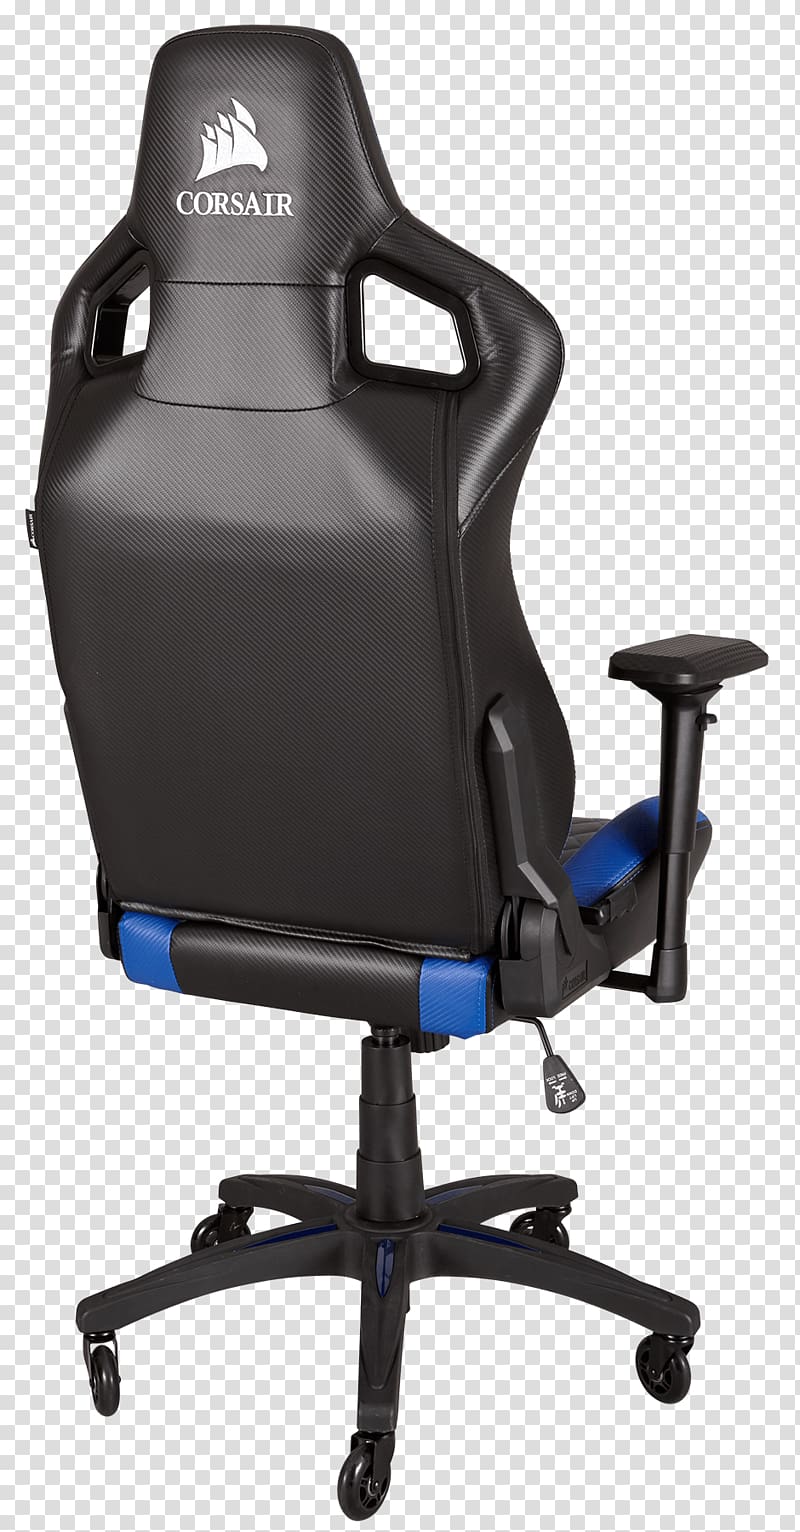 Gaming chair Corsair Components Video Games Office & Desk Chairs, skeleton driving transparent background PNG clipart